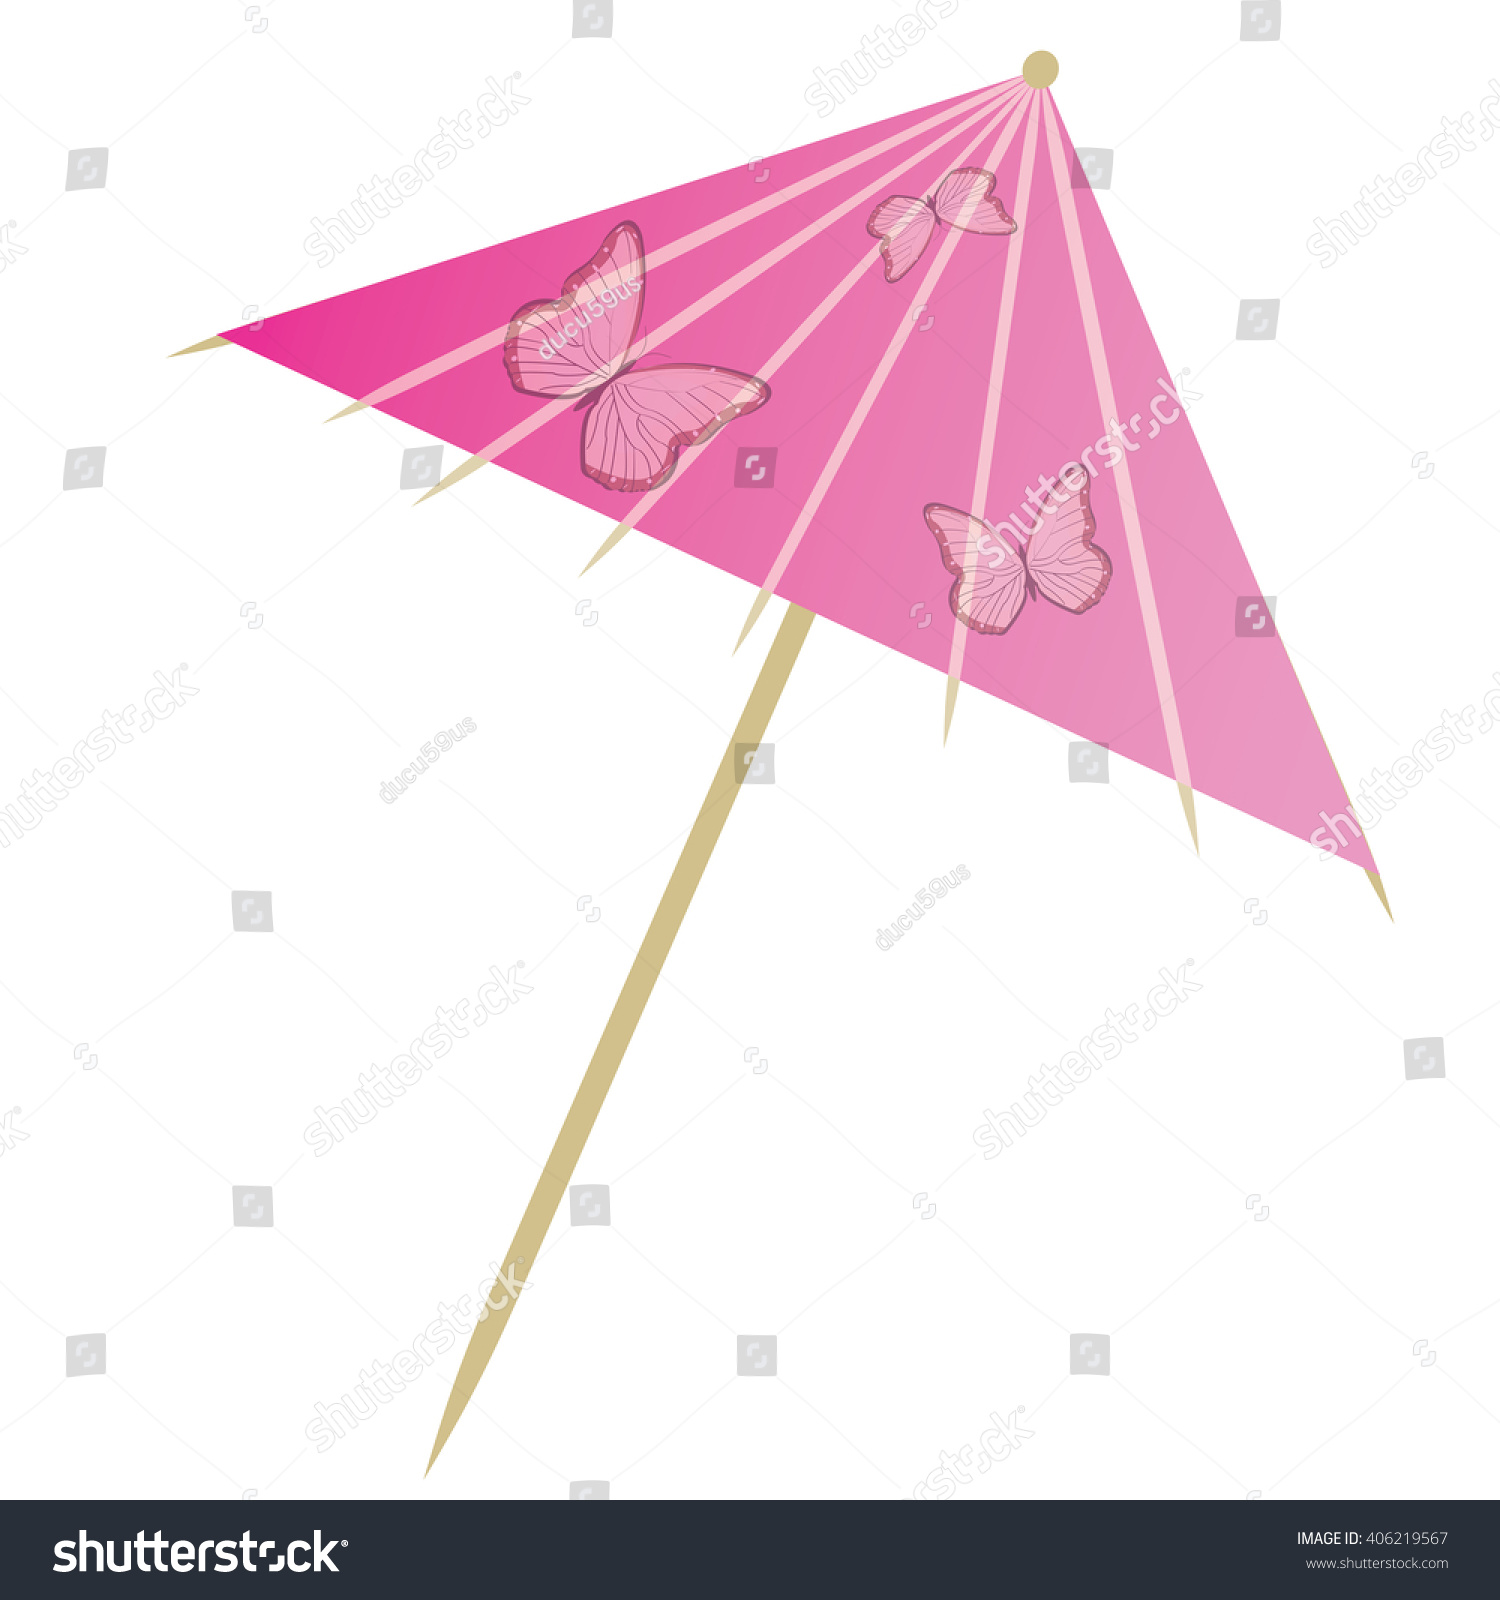 Cocktail Umbrella Isolated On White Background Stock Vector ...